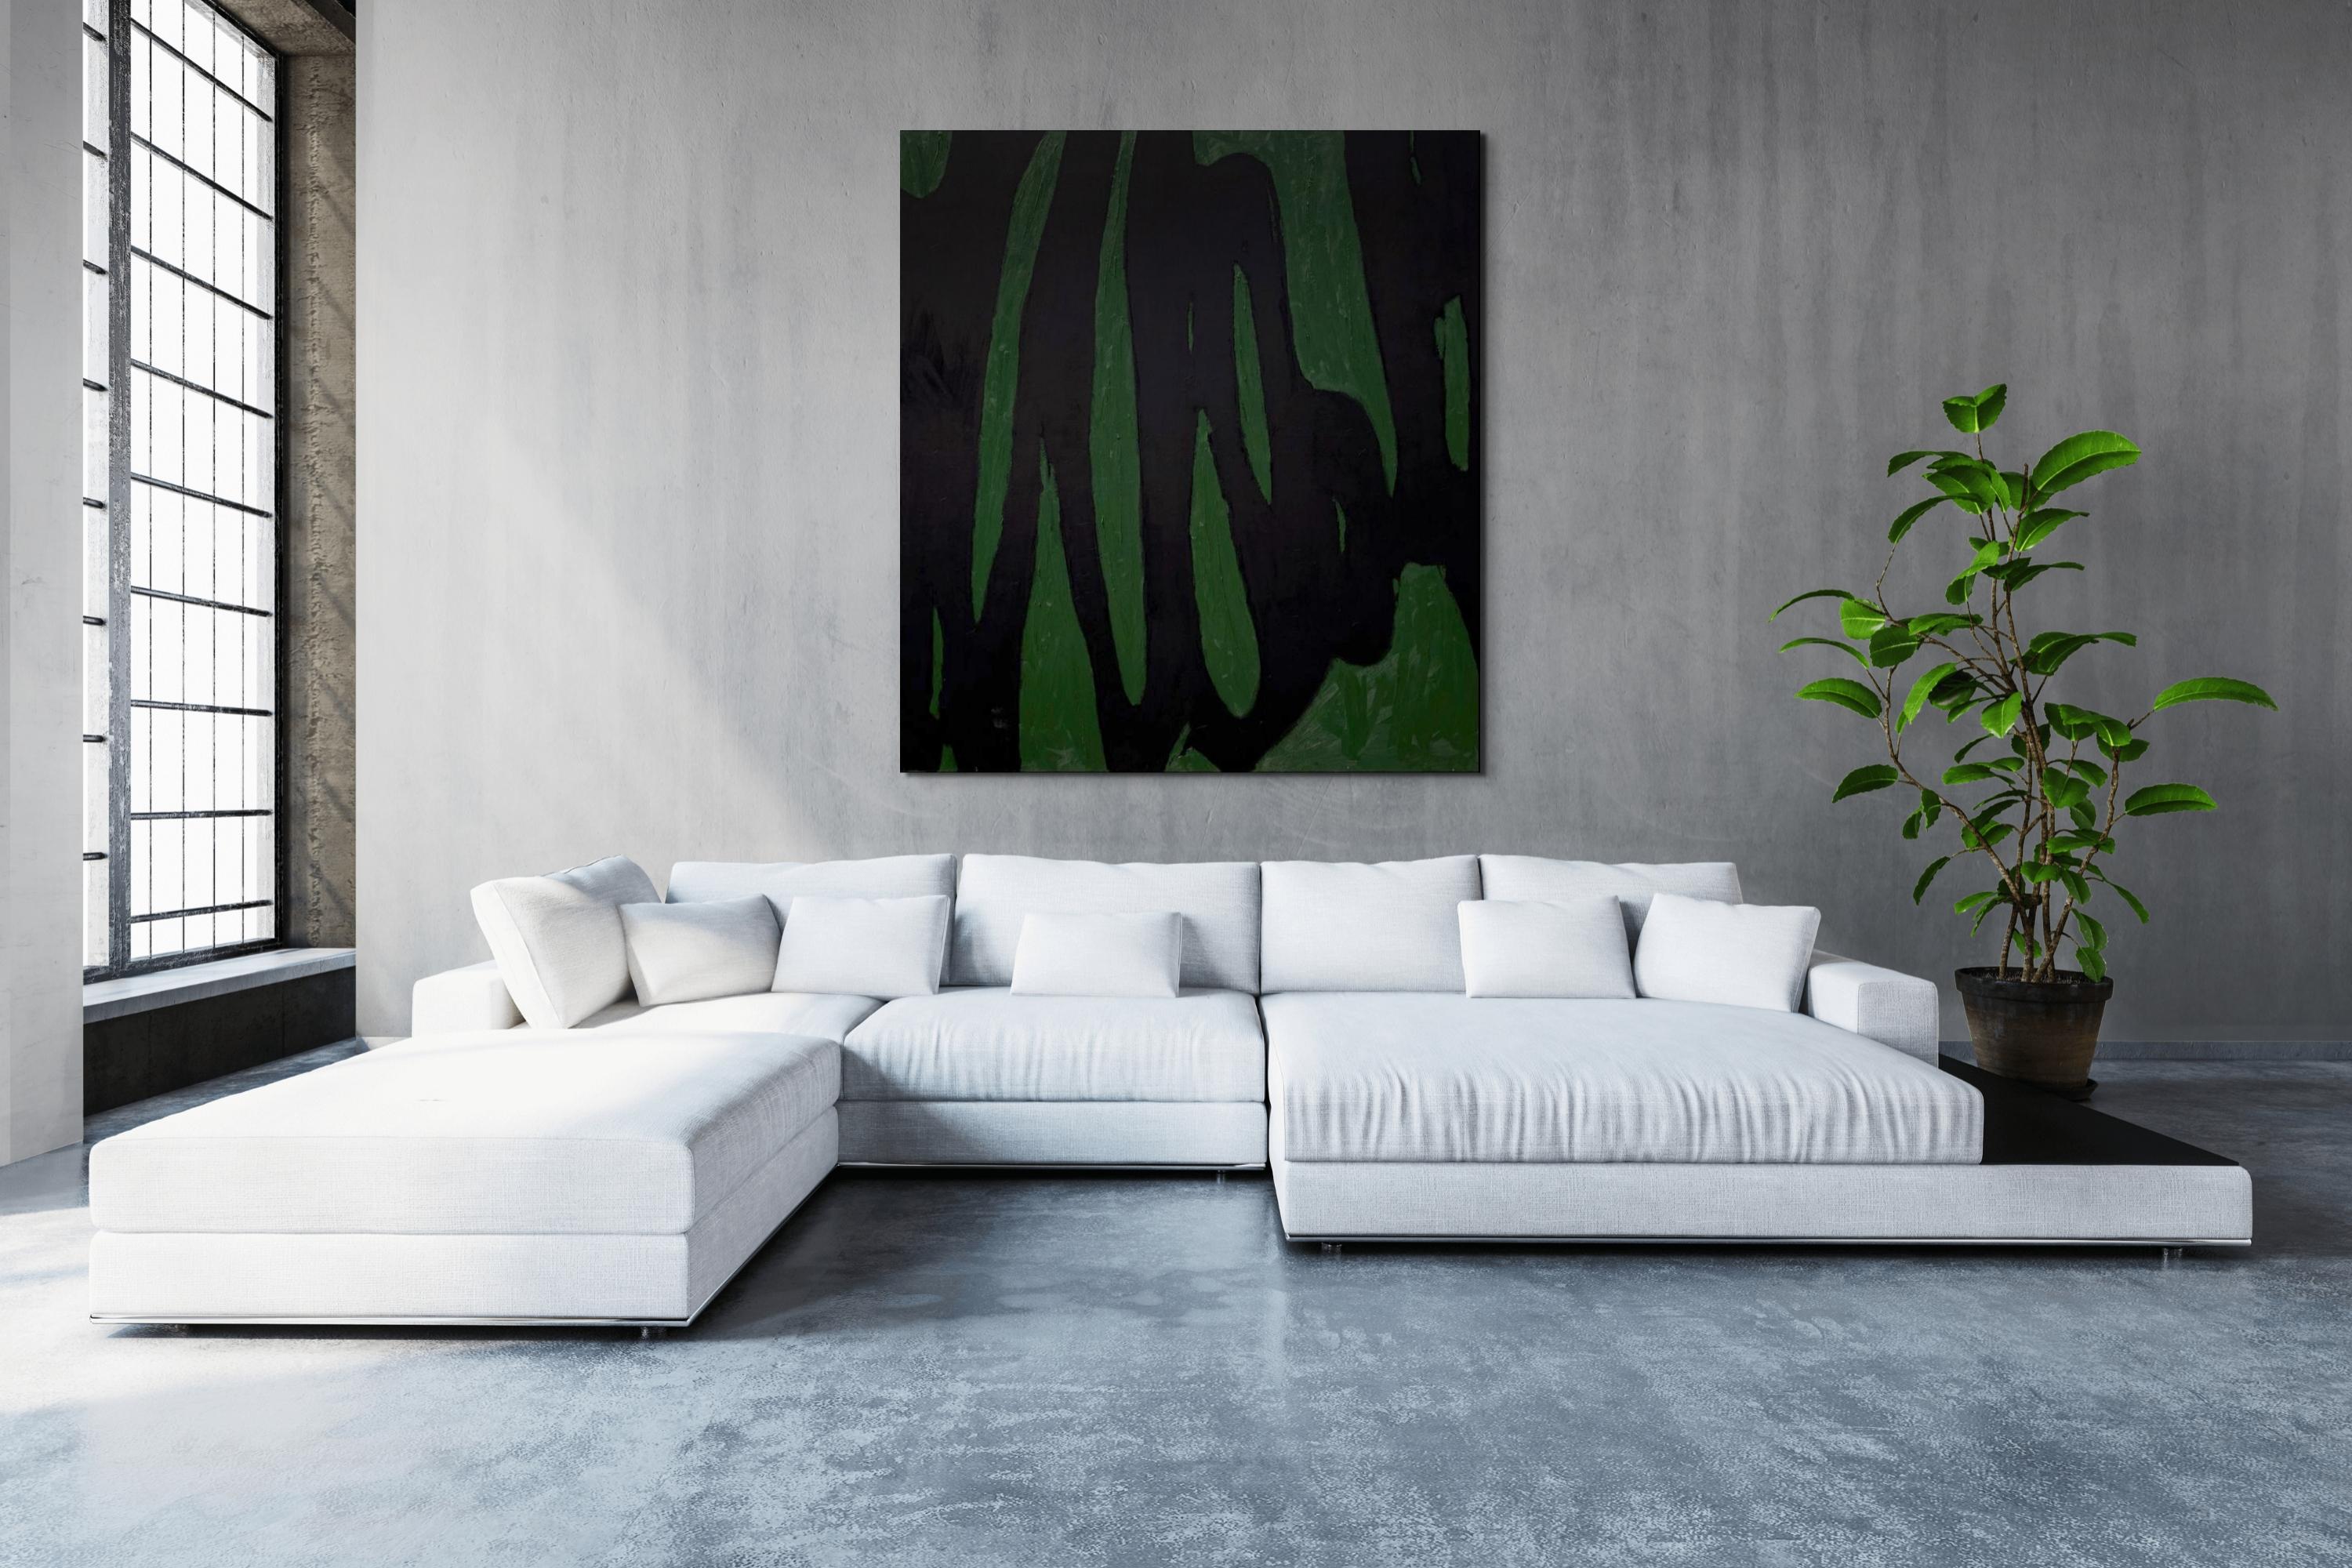 Contemporary large scale minimalist expressionist oil on raw canvas painting.
size 165'H×150'W cm

The work reflect Taron's attitude of life and of painting 'less is more'. In times of overload of visual impressions, sending the viewer on a journey